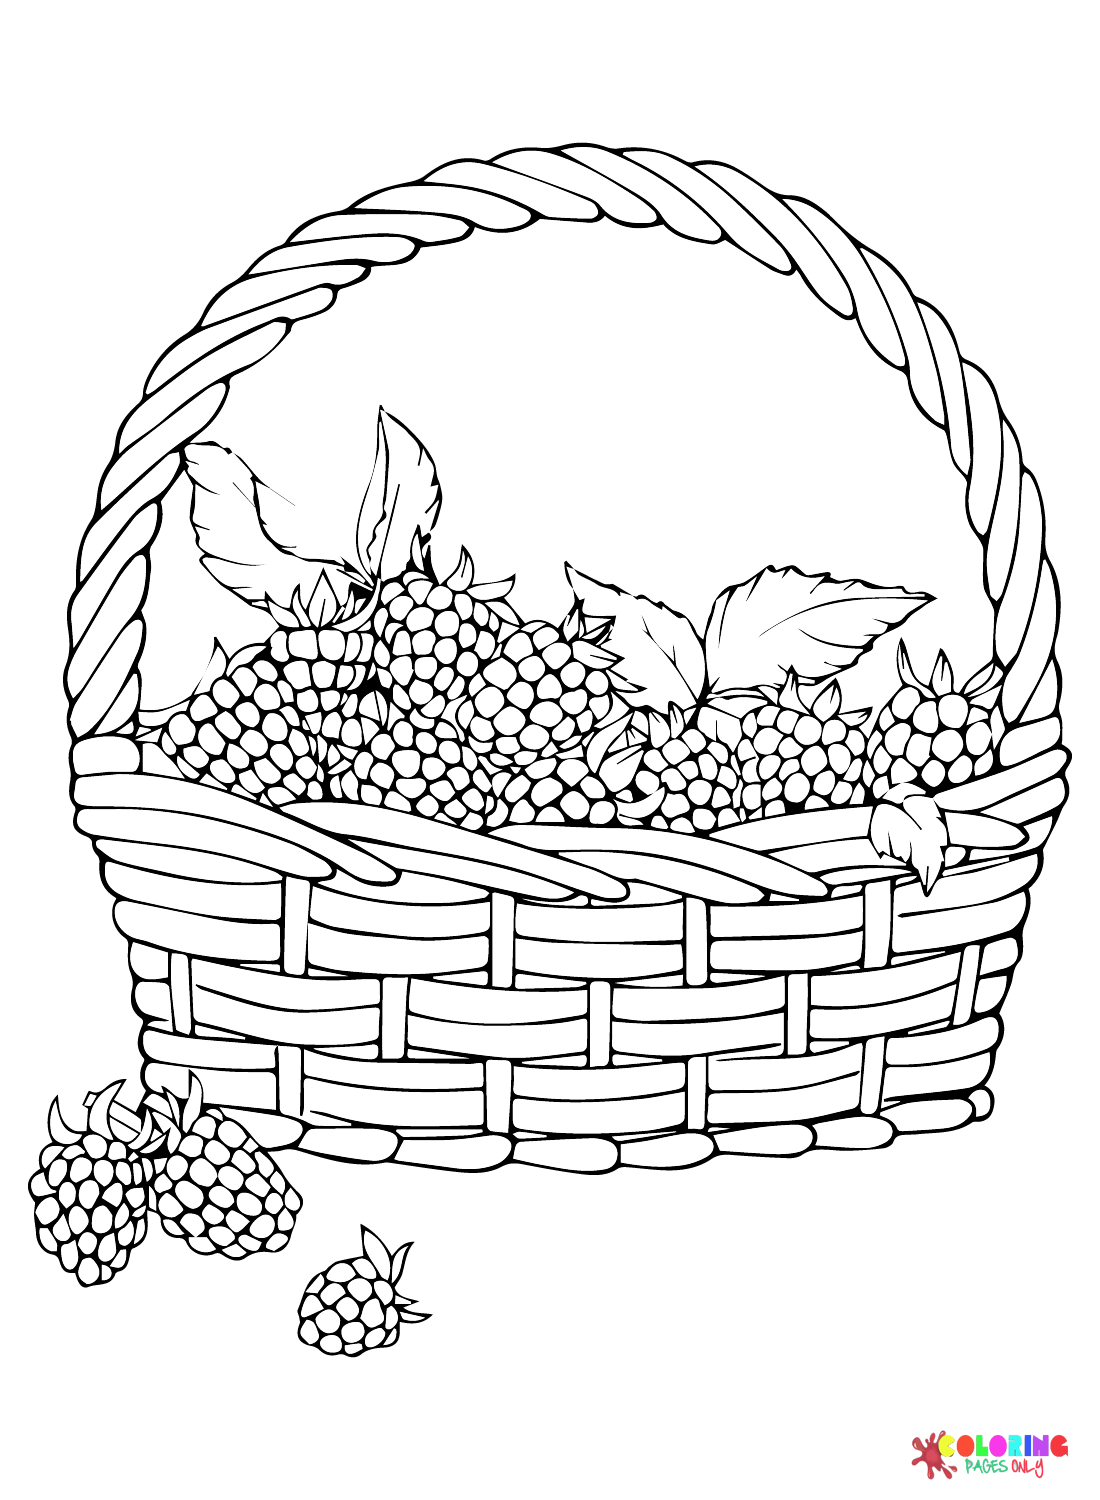 Blackberry Basket Coloring Page